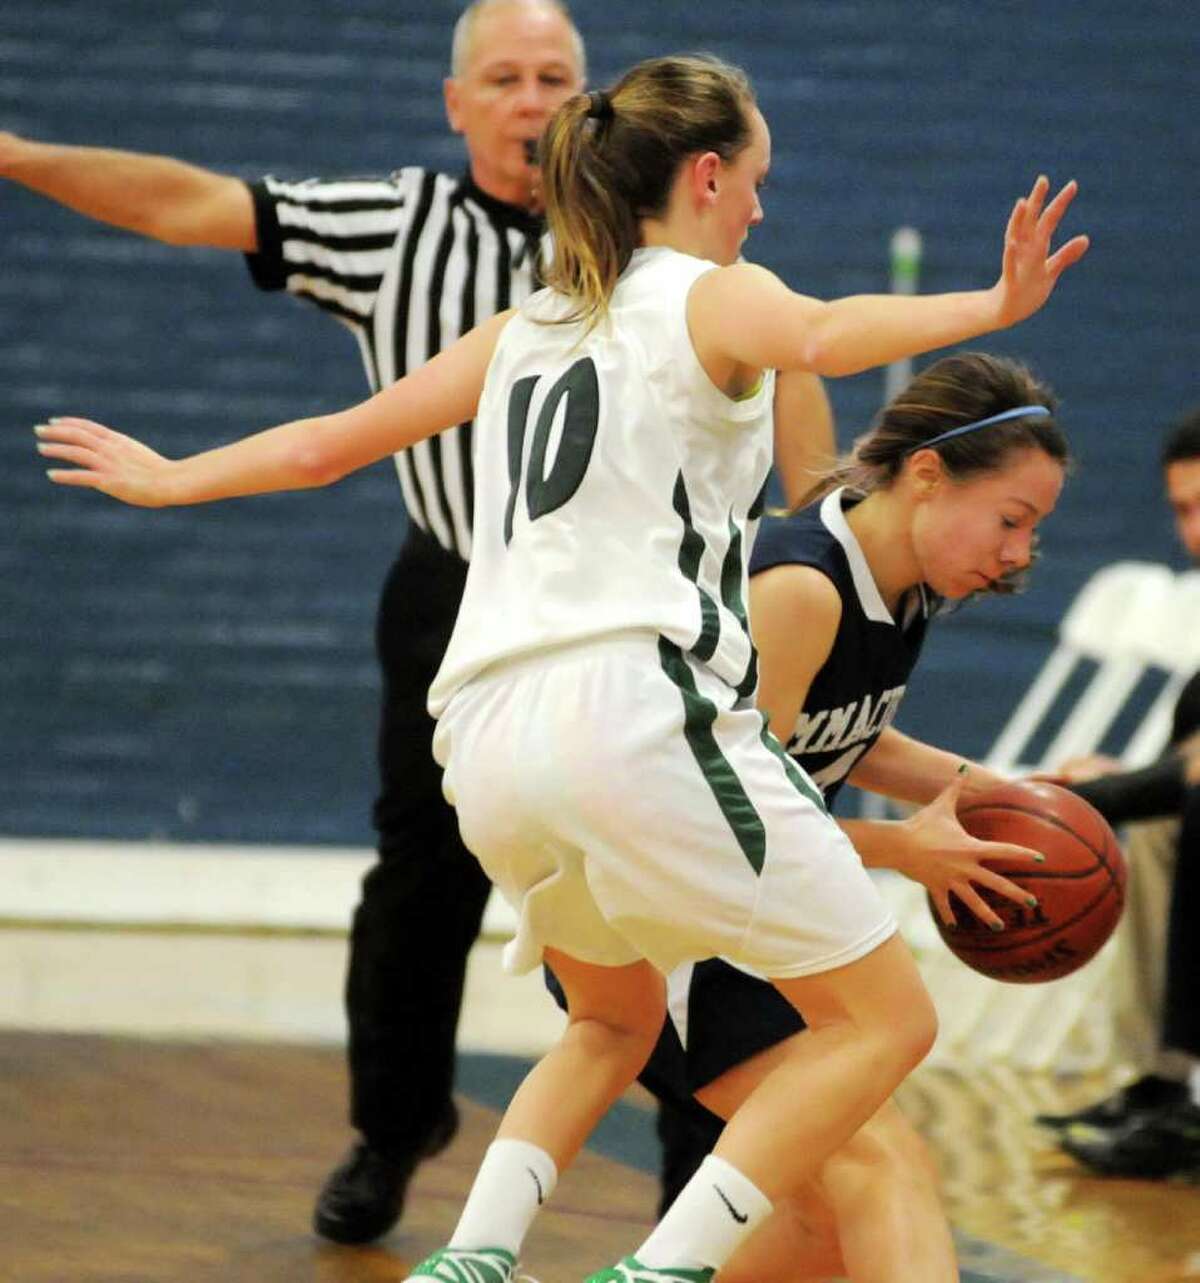 New Milford High School's, Jessica Noteware, plays defense while Immaculate High school's, Emily Fredette, has possession of the ball during the 2011 7th Annual Girls Holiday Festival at the Danbury War Memorial on Tuesday, Dec. 27.